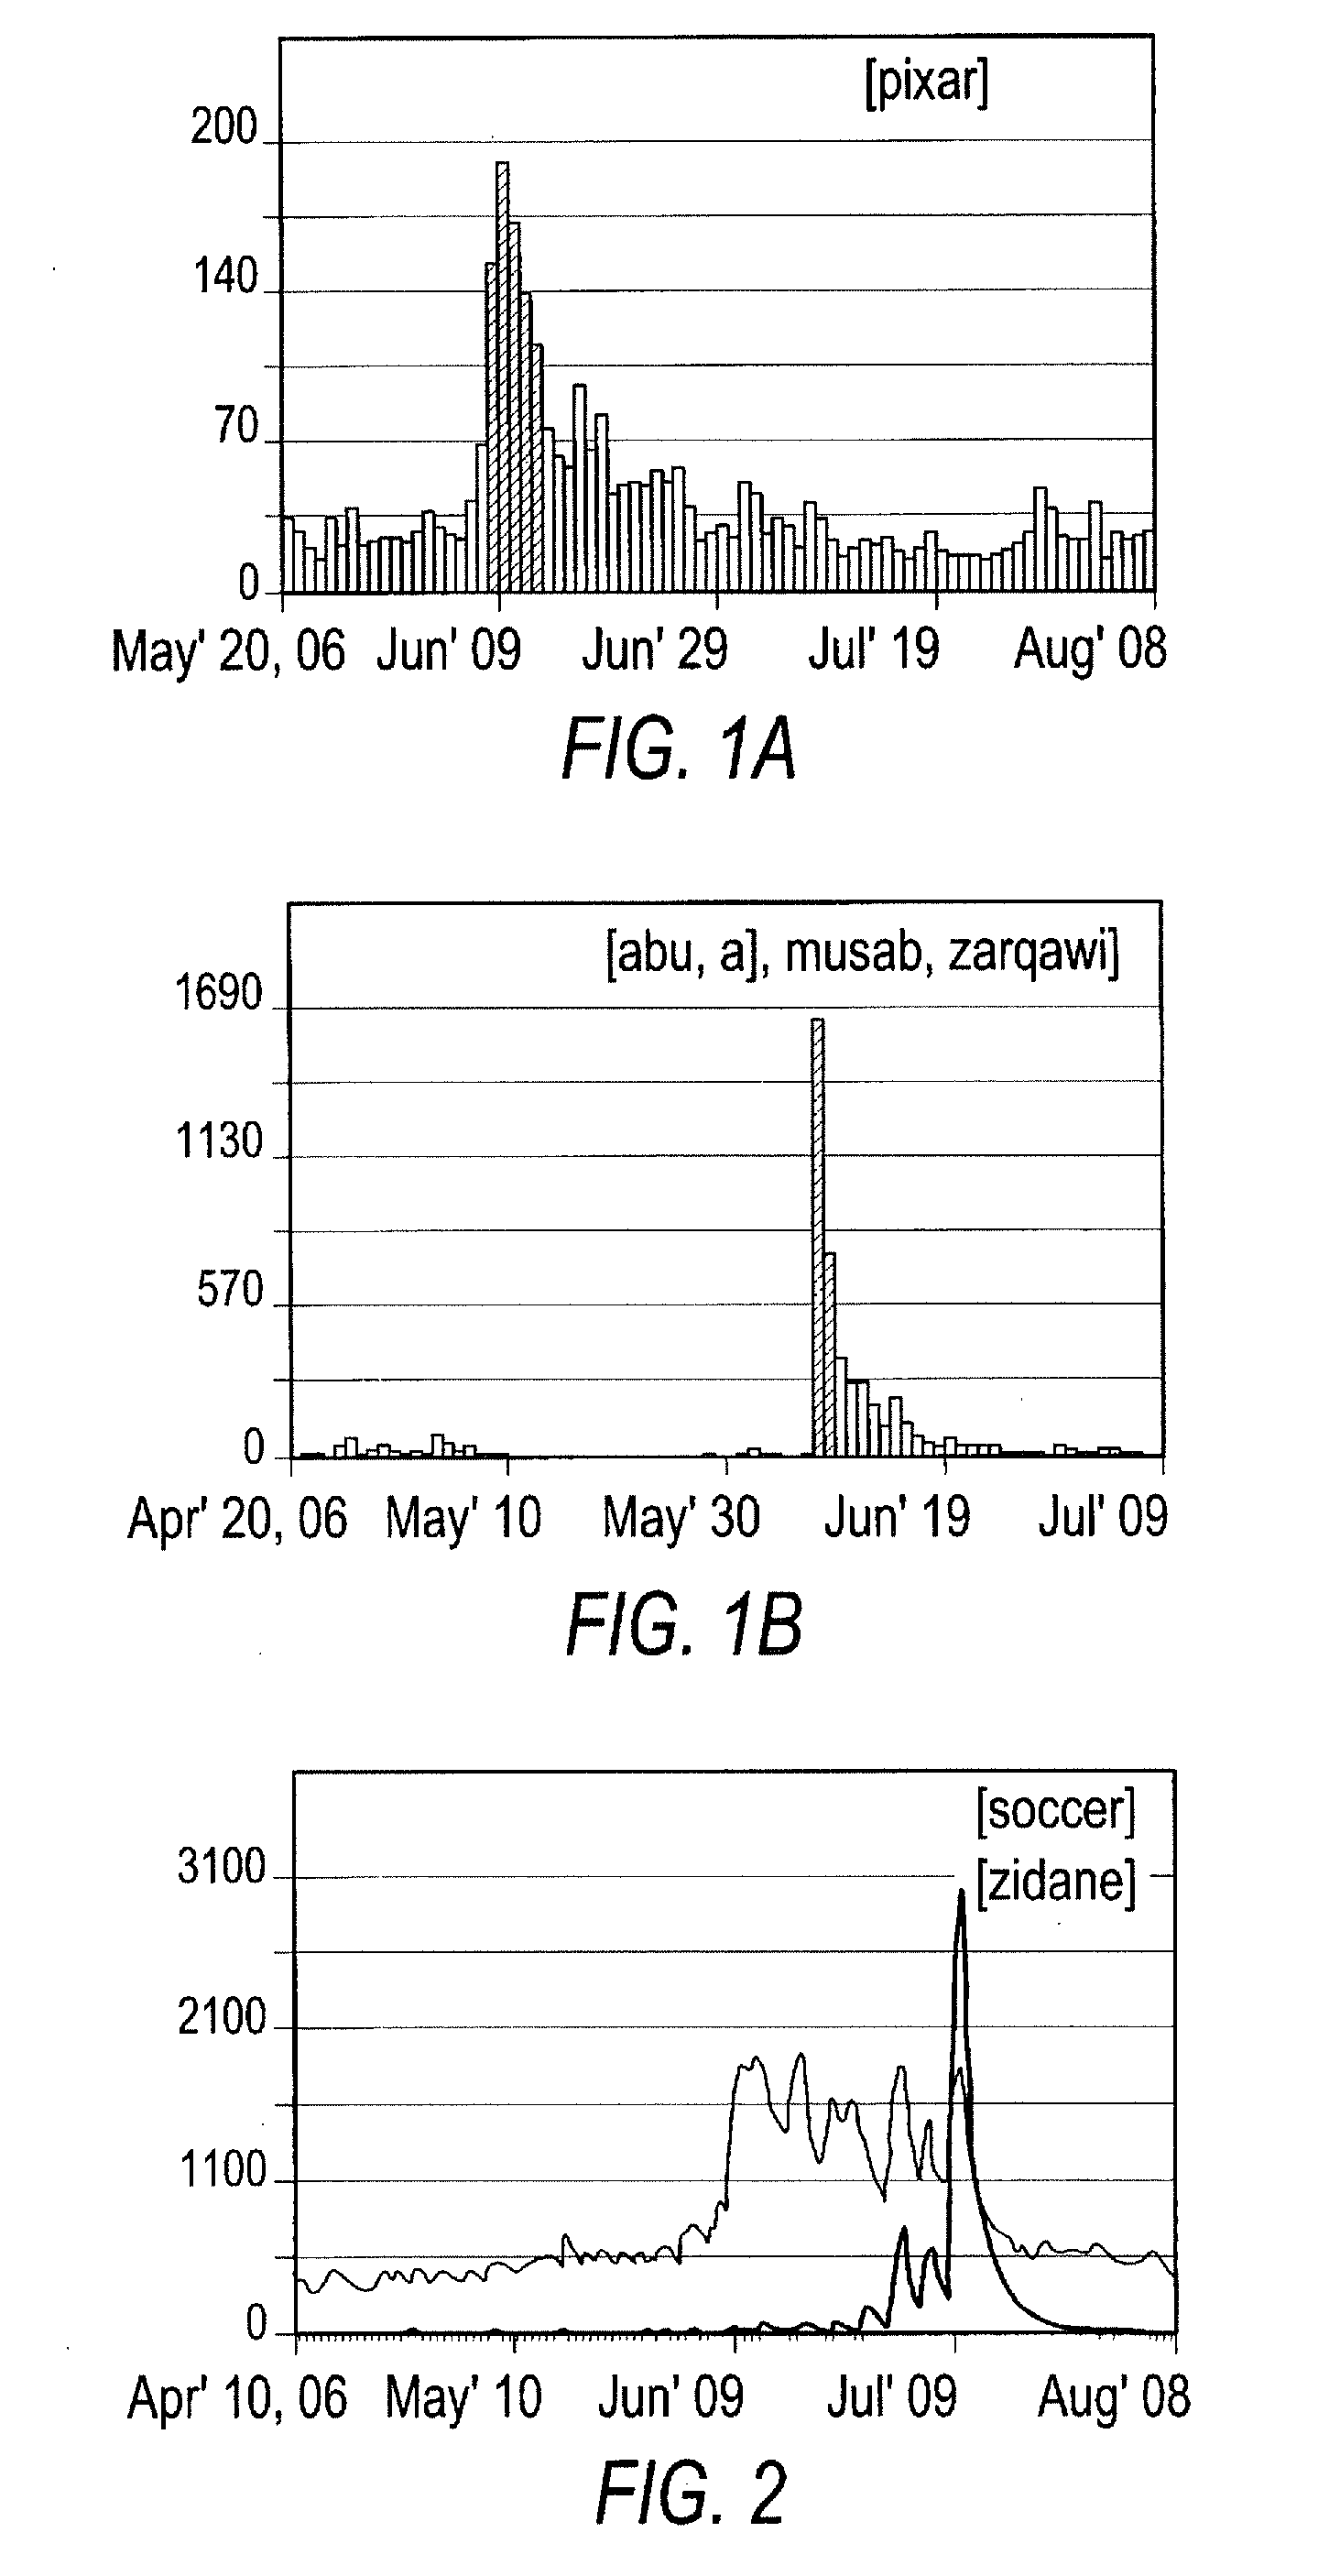 Method and system for information discovery and text analysis